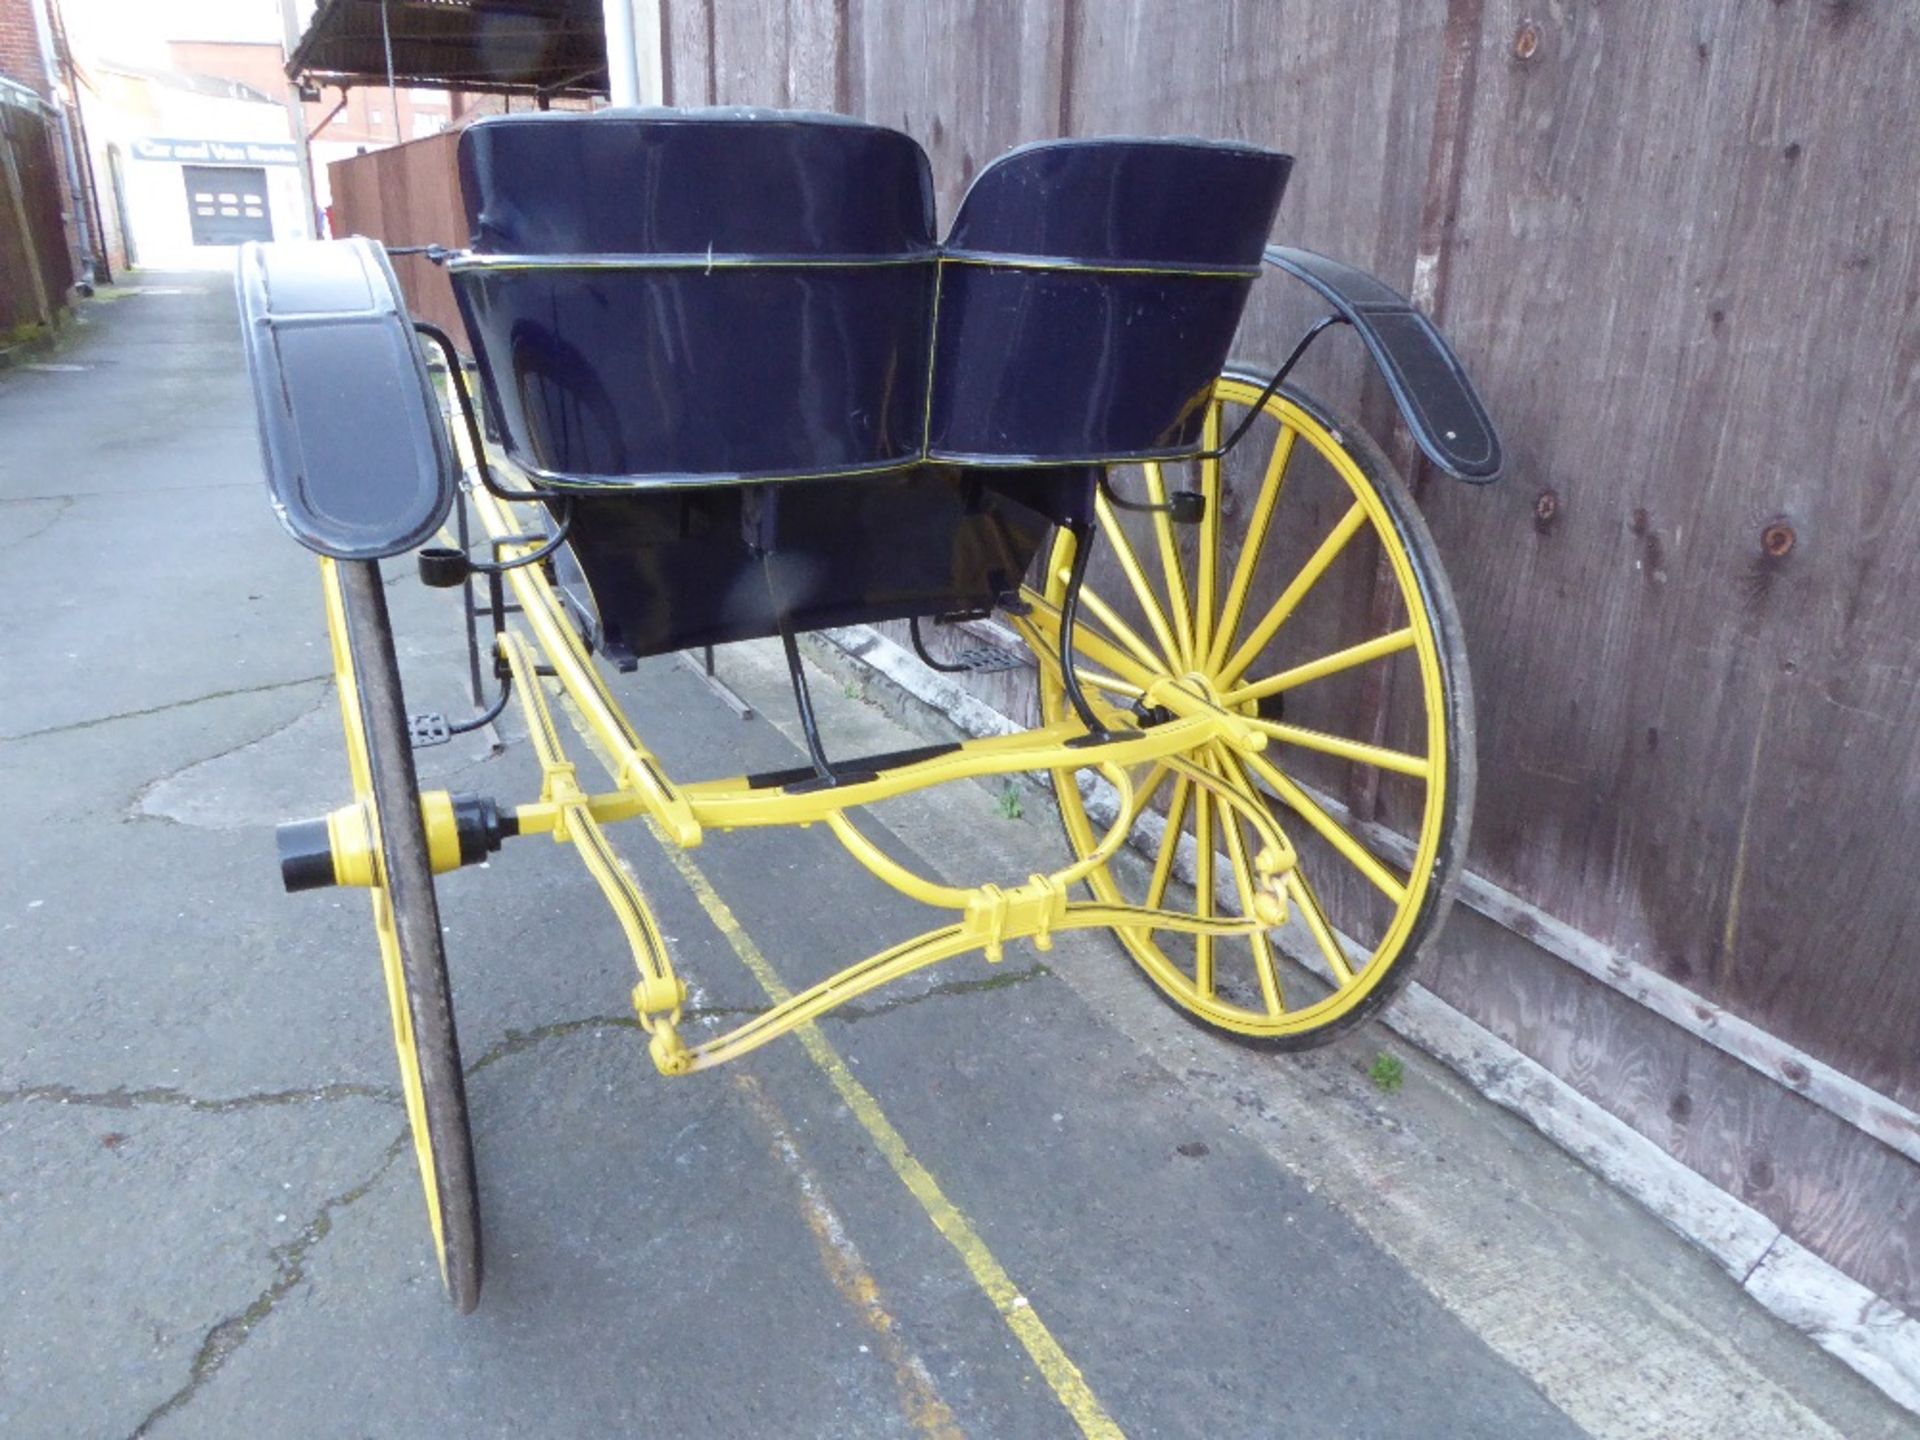 BUCKET SEAT GIG by Brewster & Co., Broom St., NY circa 1914 to suit 14.2 to 15.2hh. Painted navy and - Image 2 of 3